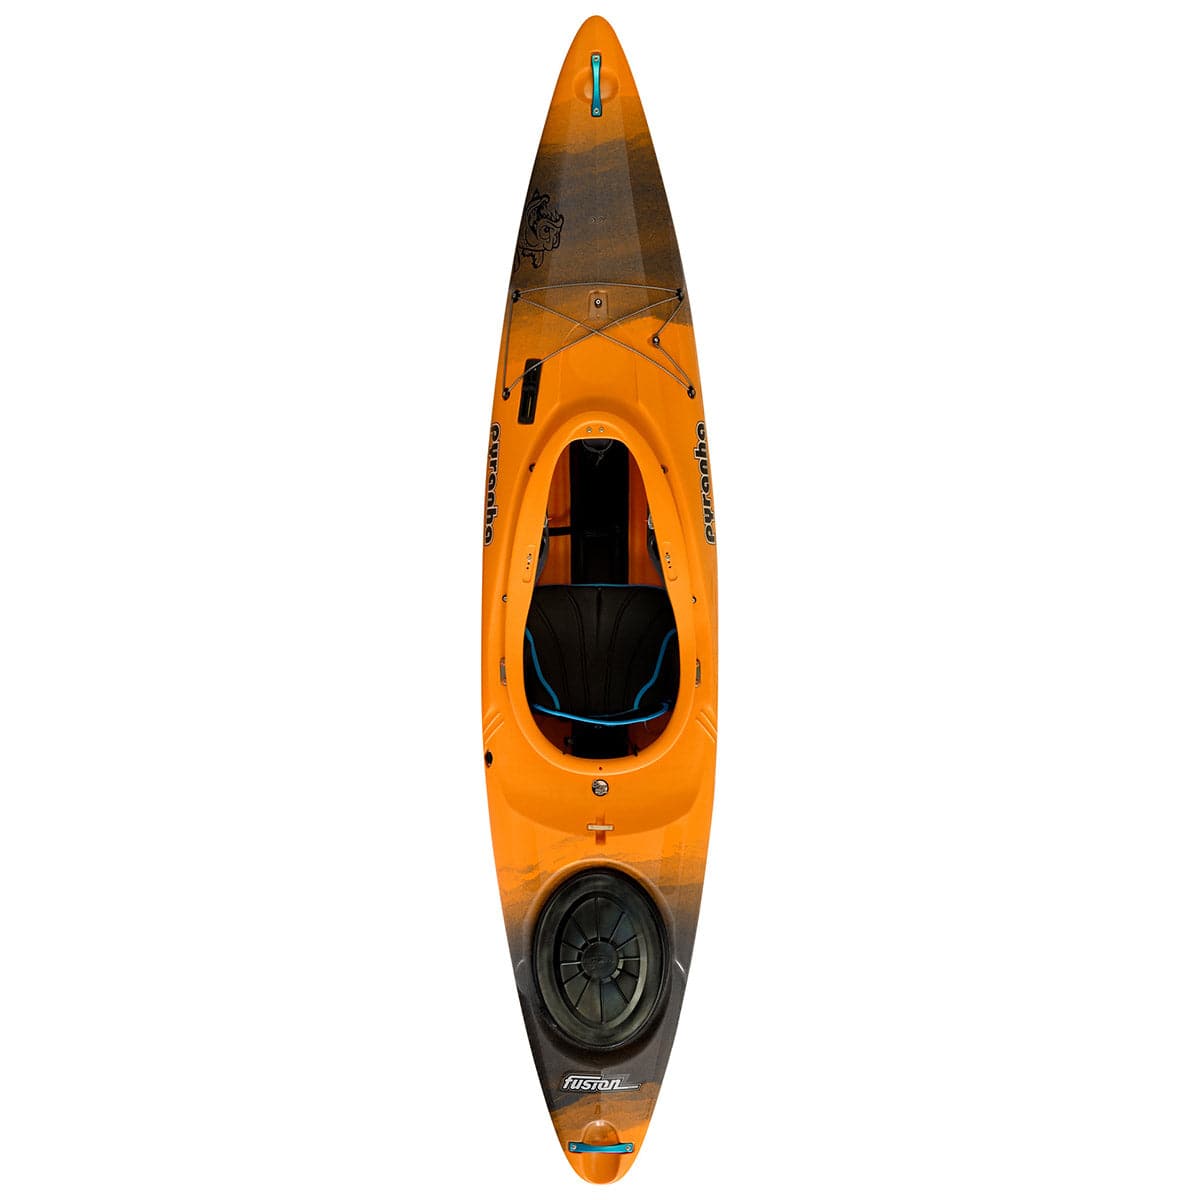 Featuring the Fusion MK II expedition / cross over kayak manufactured by Pyranha shown here from a second angle.